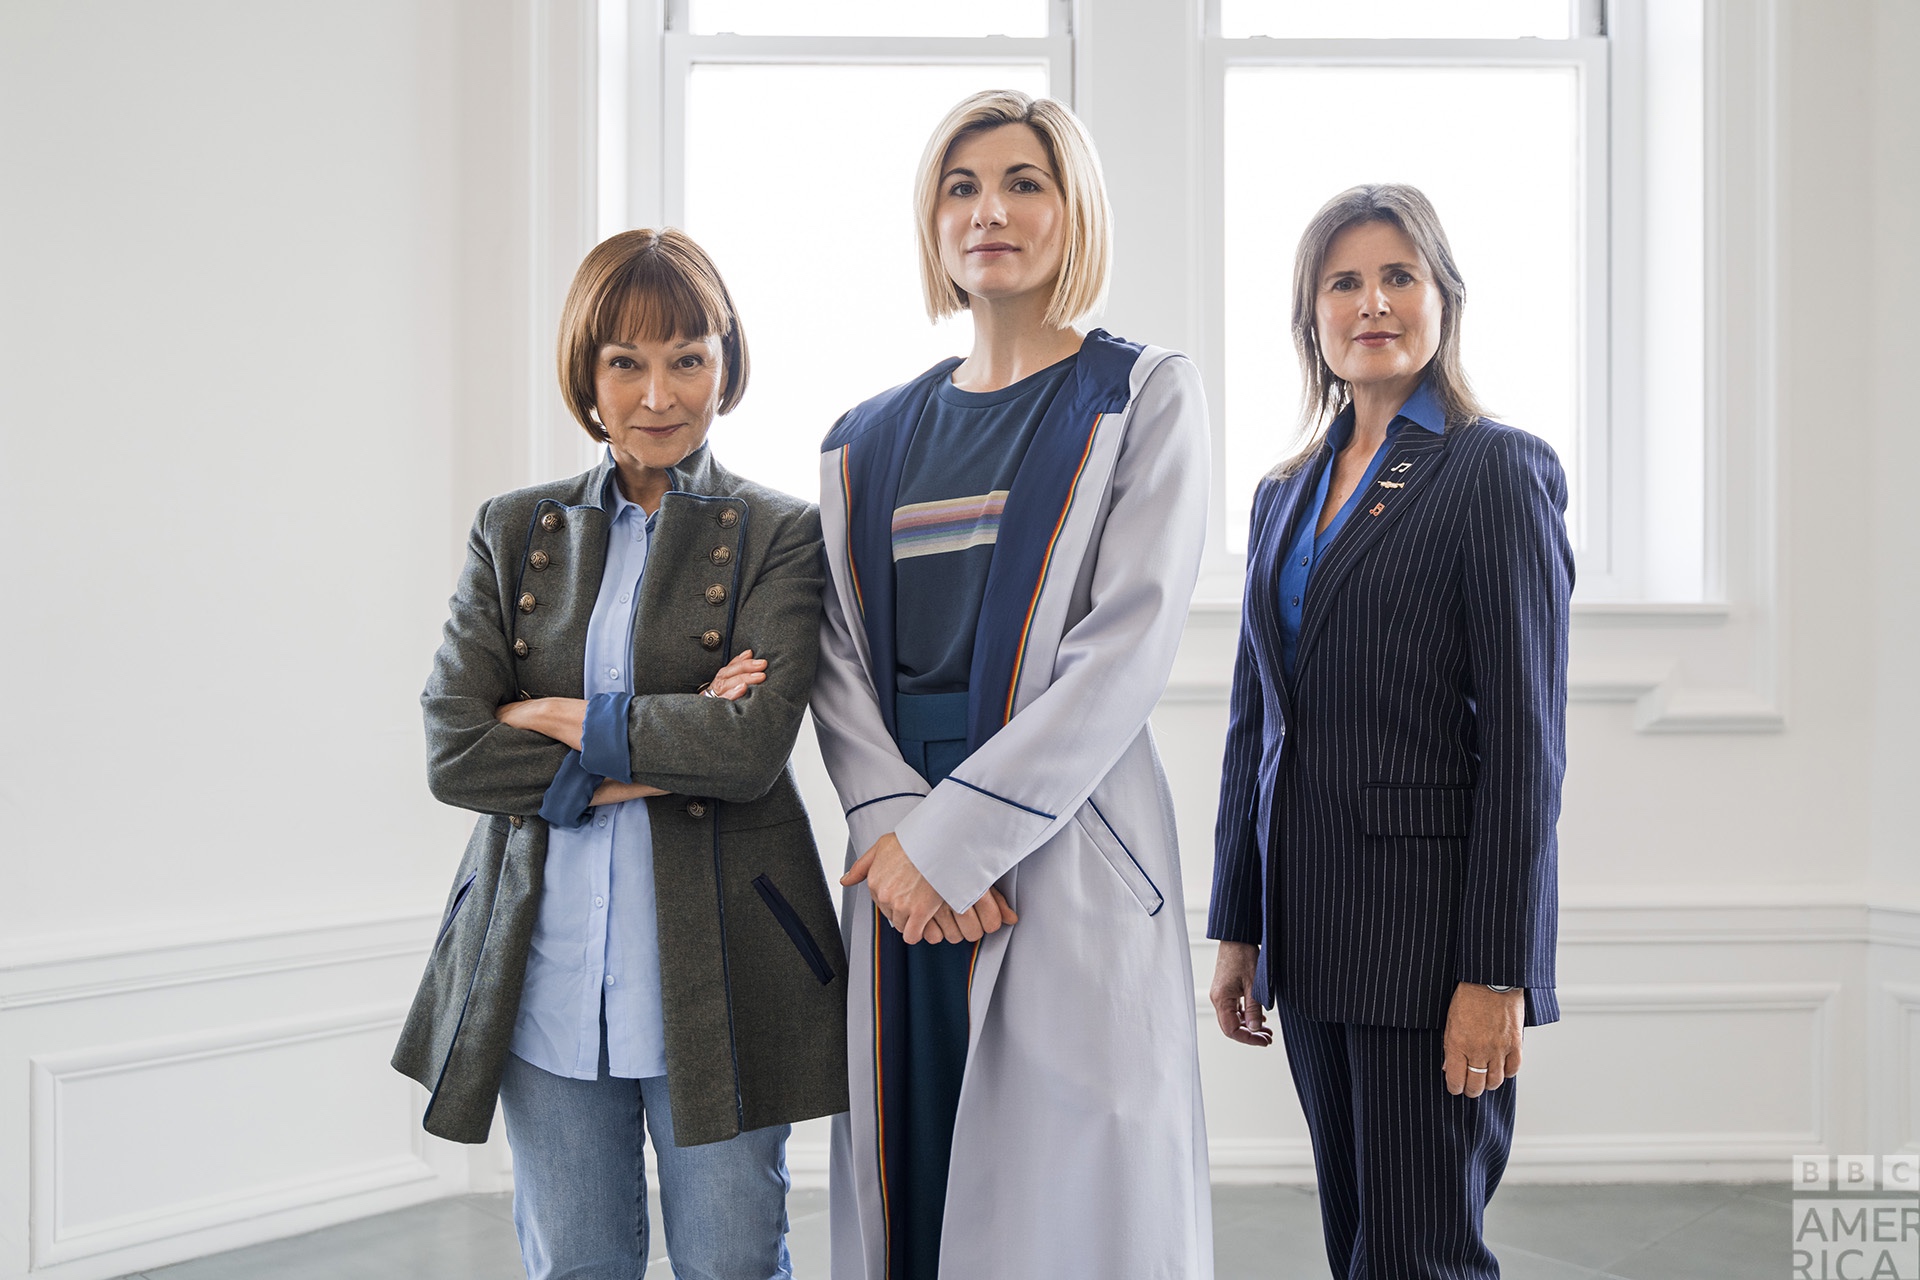 Jodie Whittaker, Janet Fielding and Sophie Aldred (Photo: BBC America)